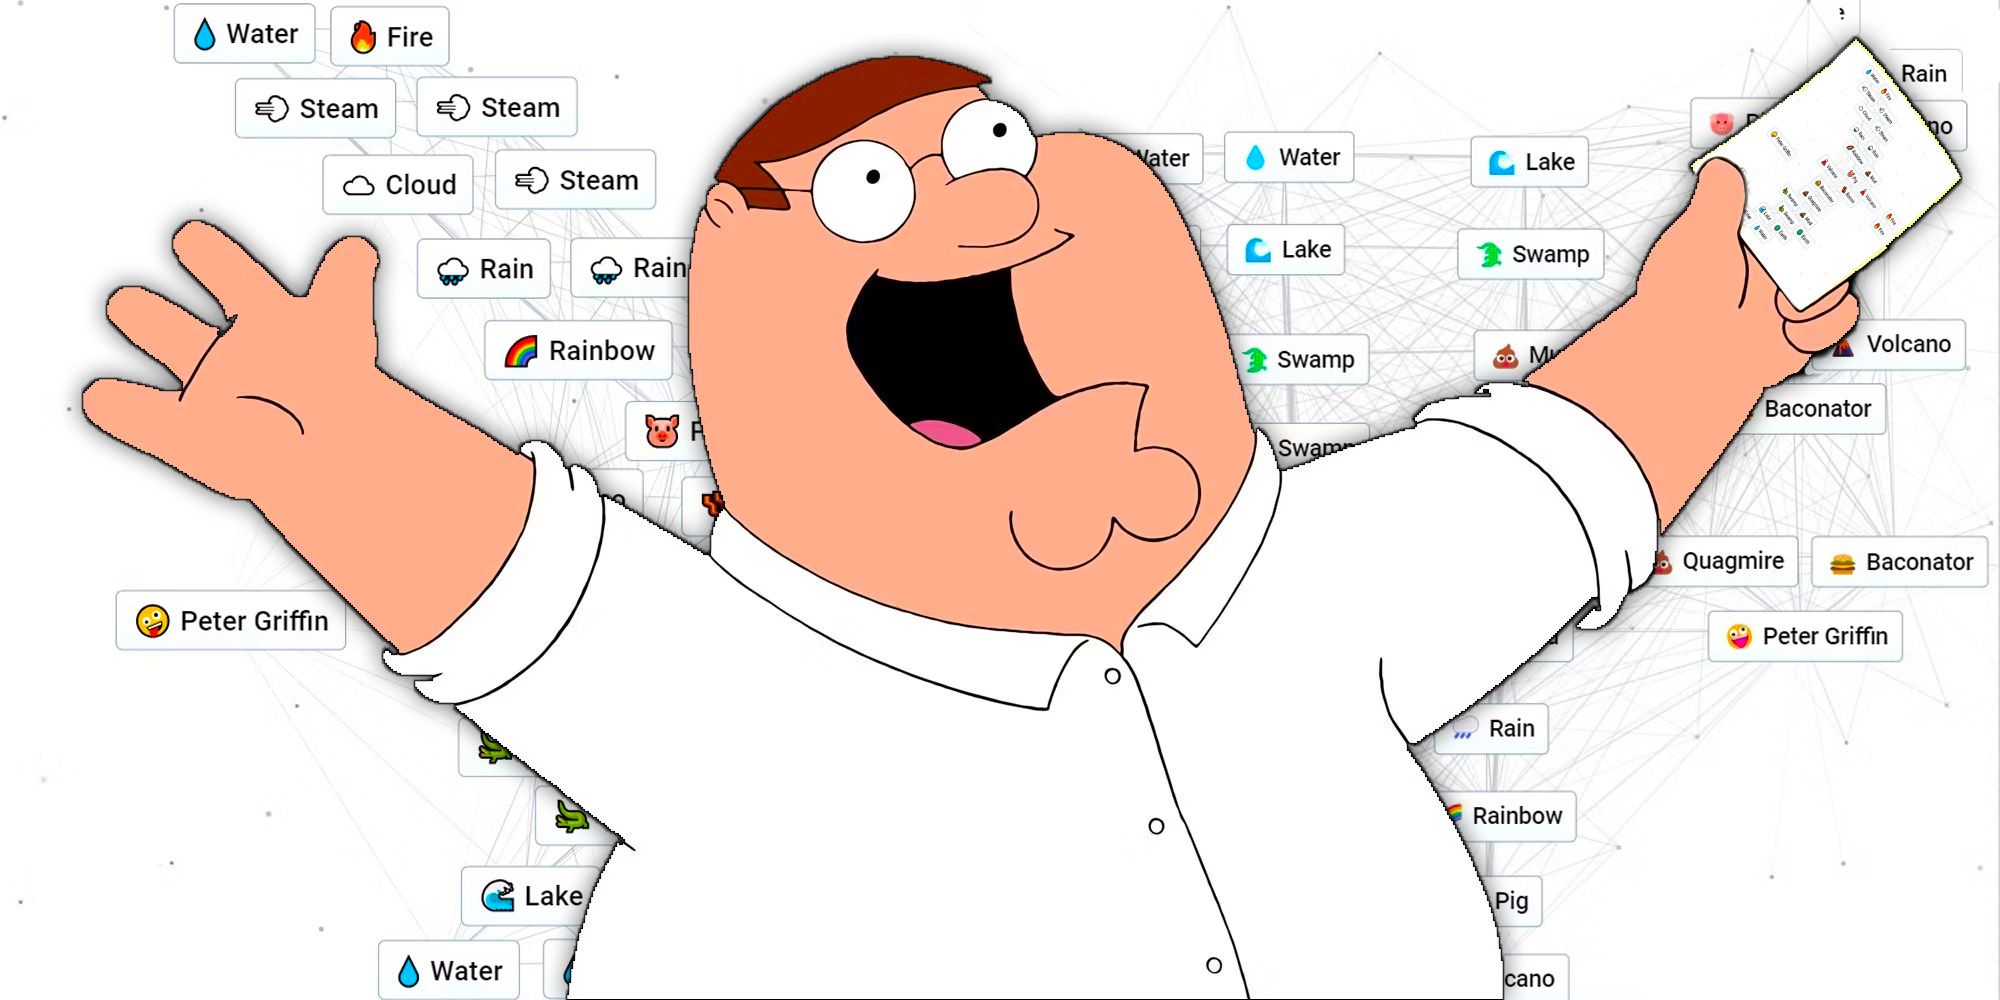 Peter Griffin raising his hand with Infinite Craft elements in the background